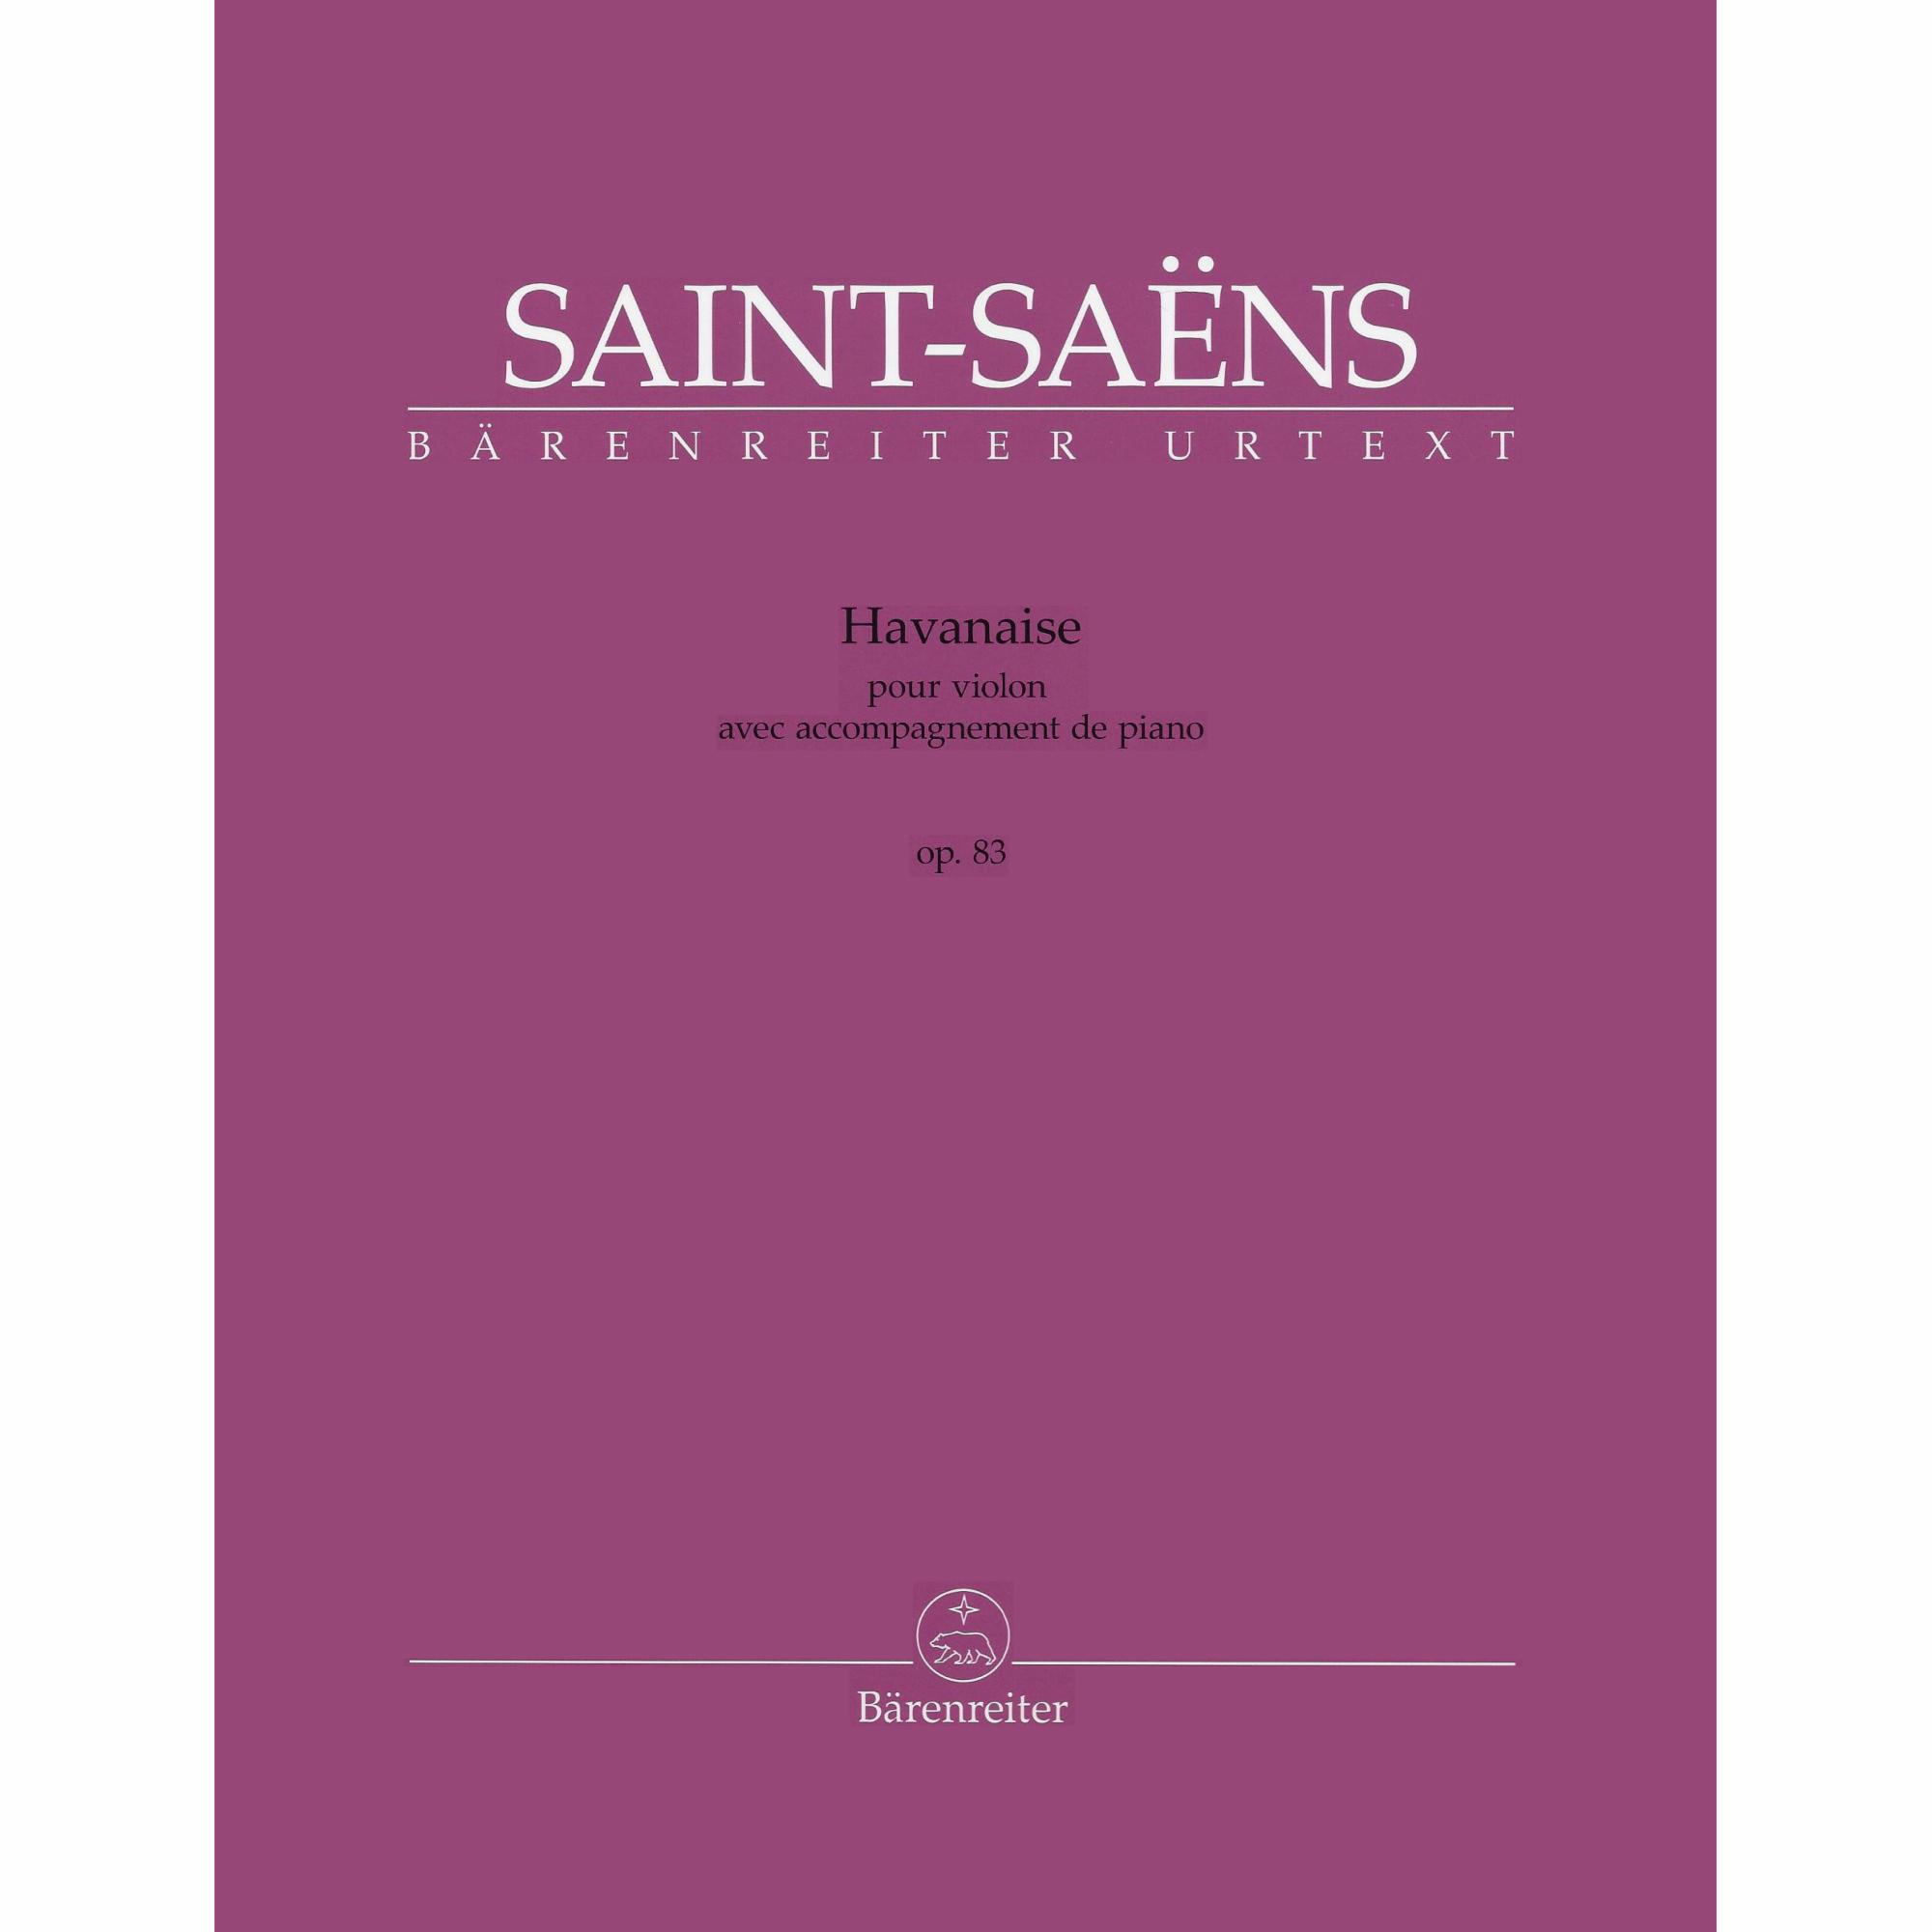 Saint-Saens -- Havanaise, Op. 83 for Violin and Piano